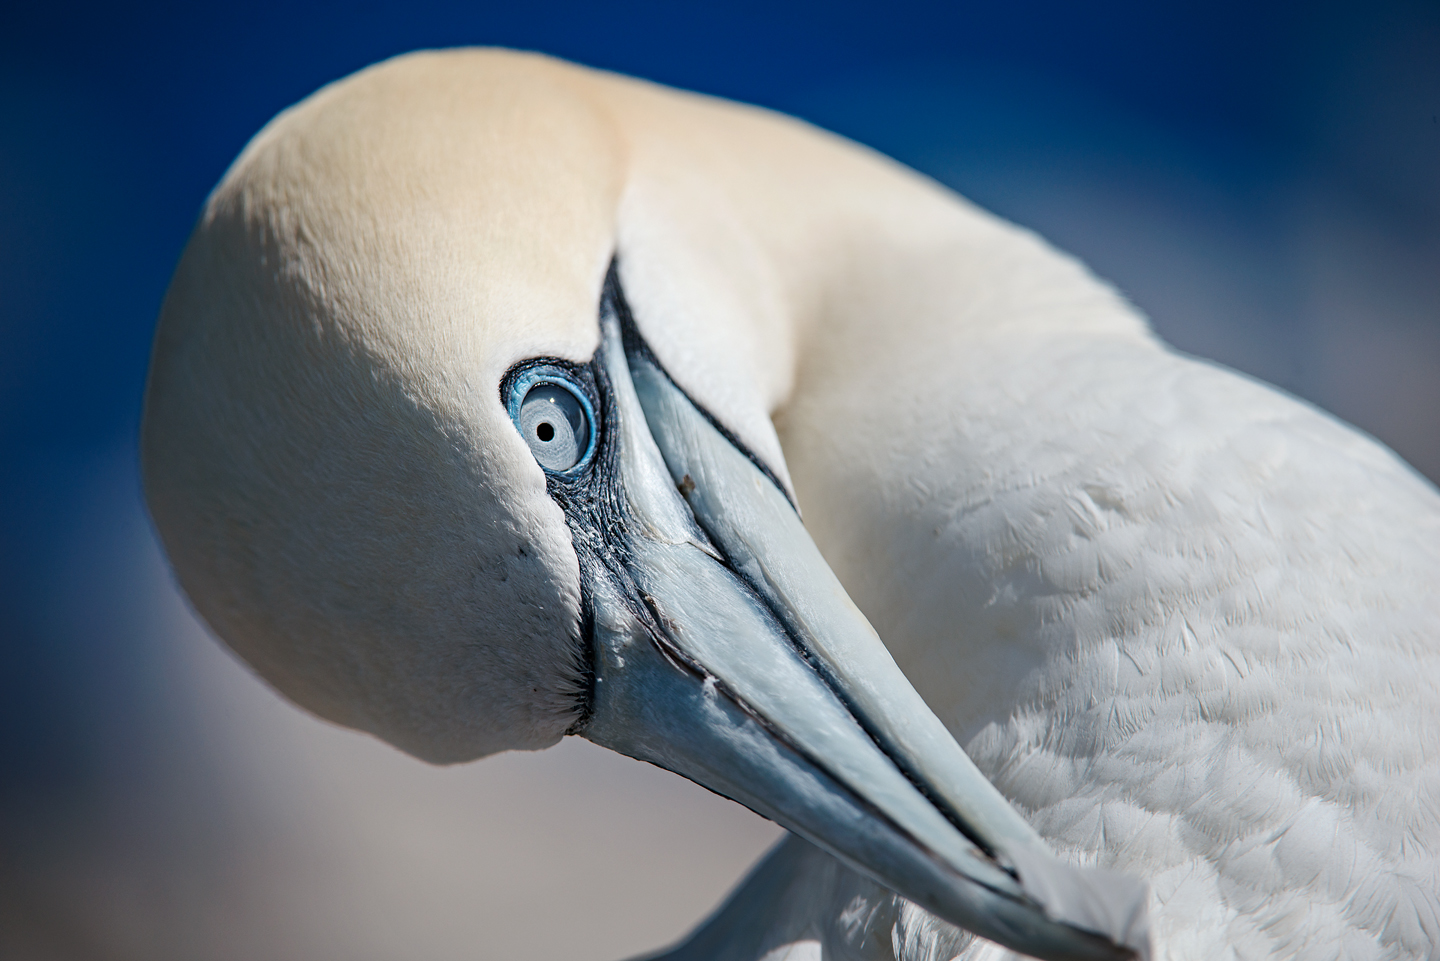  The UK has a great responsibility to protect the northern gannet. Being home to 3/4 of the global population, any policy made that affects gannets in the UK will have ramifications for the health of the species 